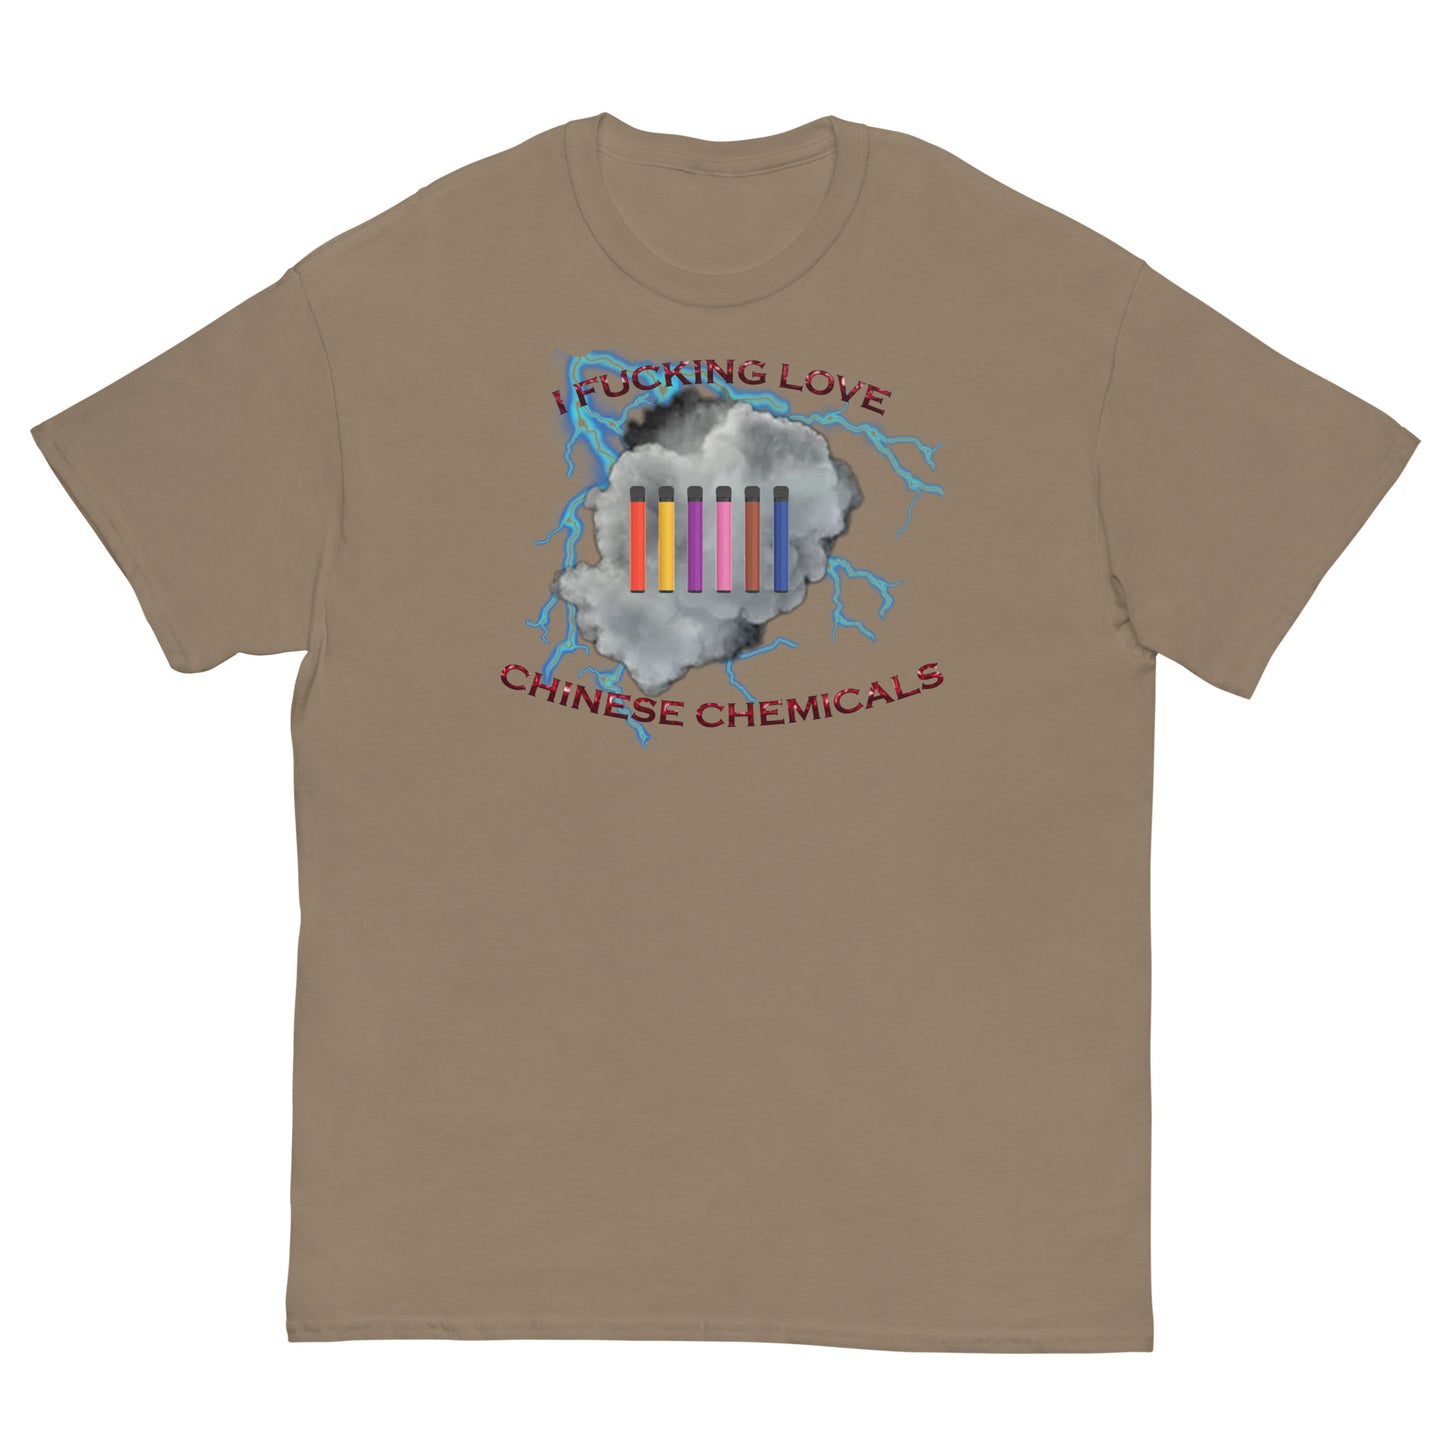 Chinese Chemicals Budget Tee